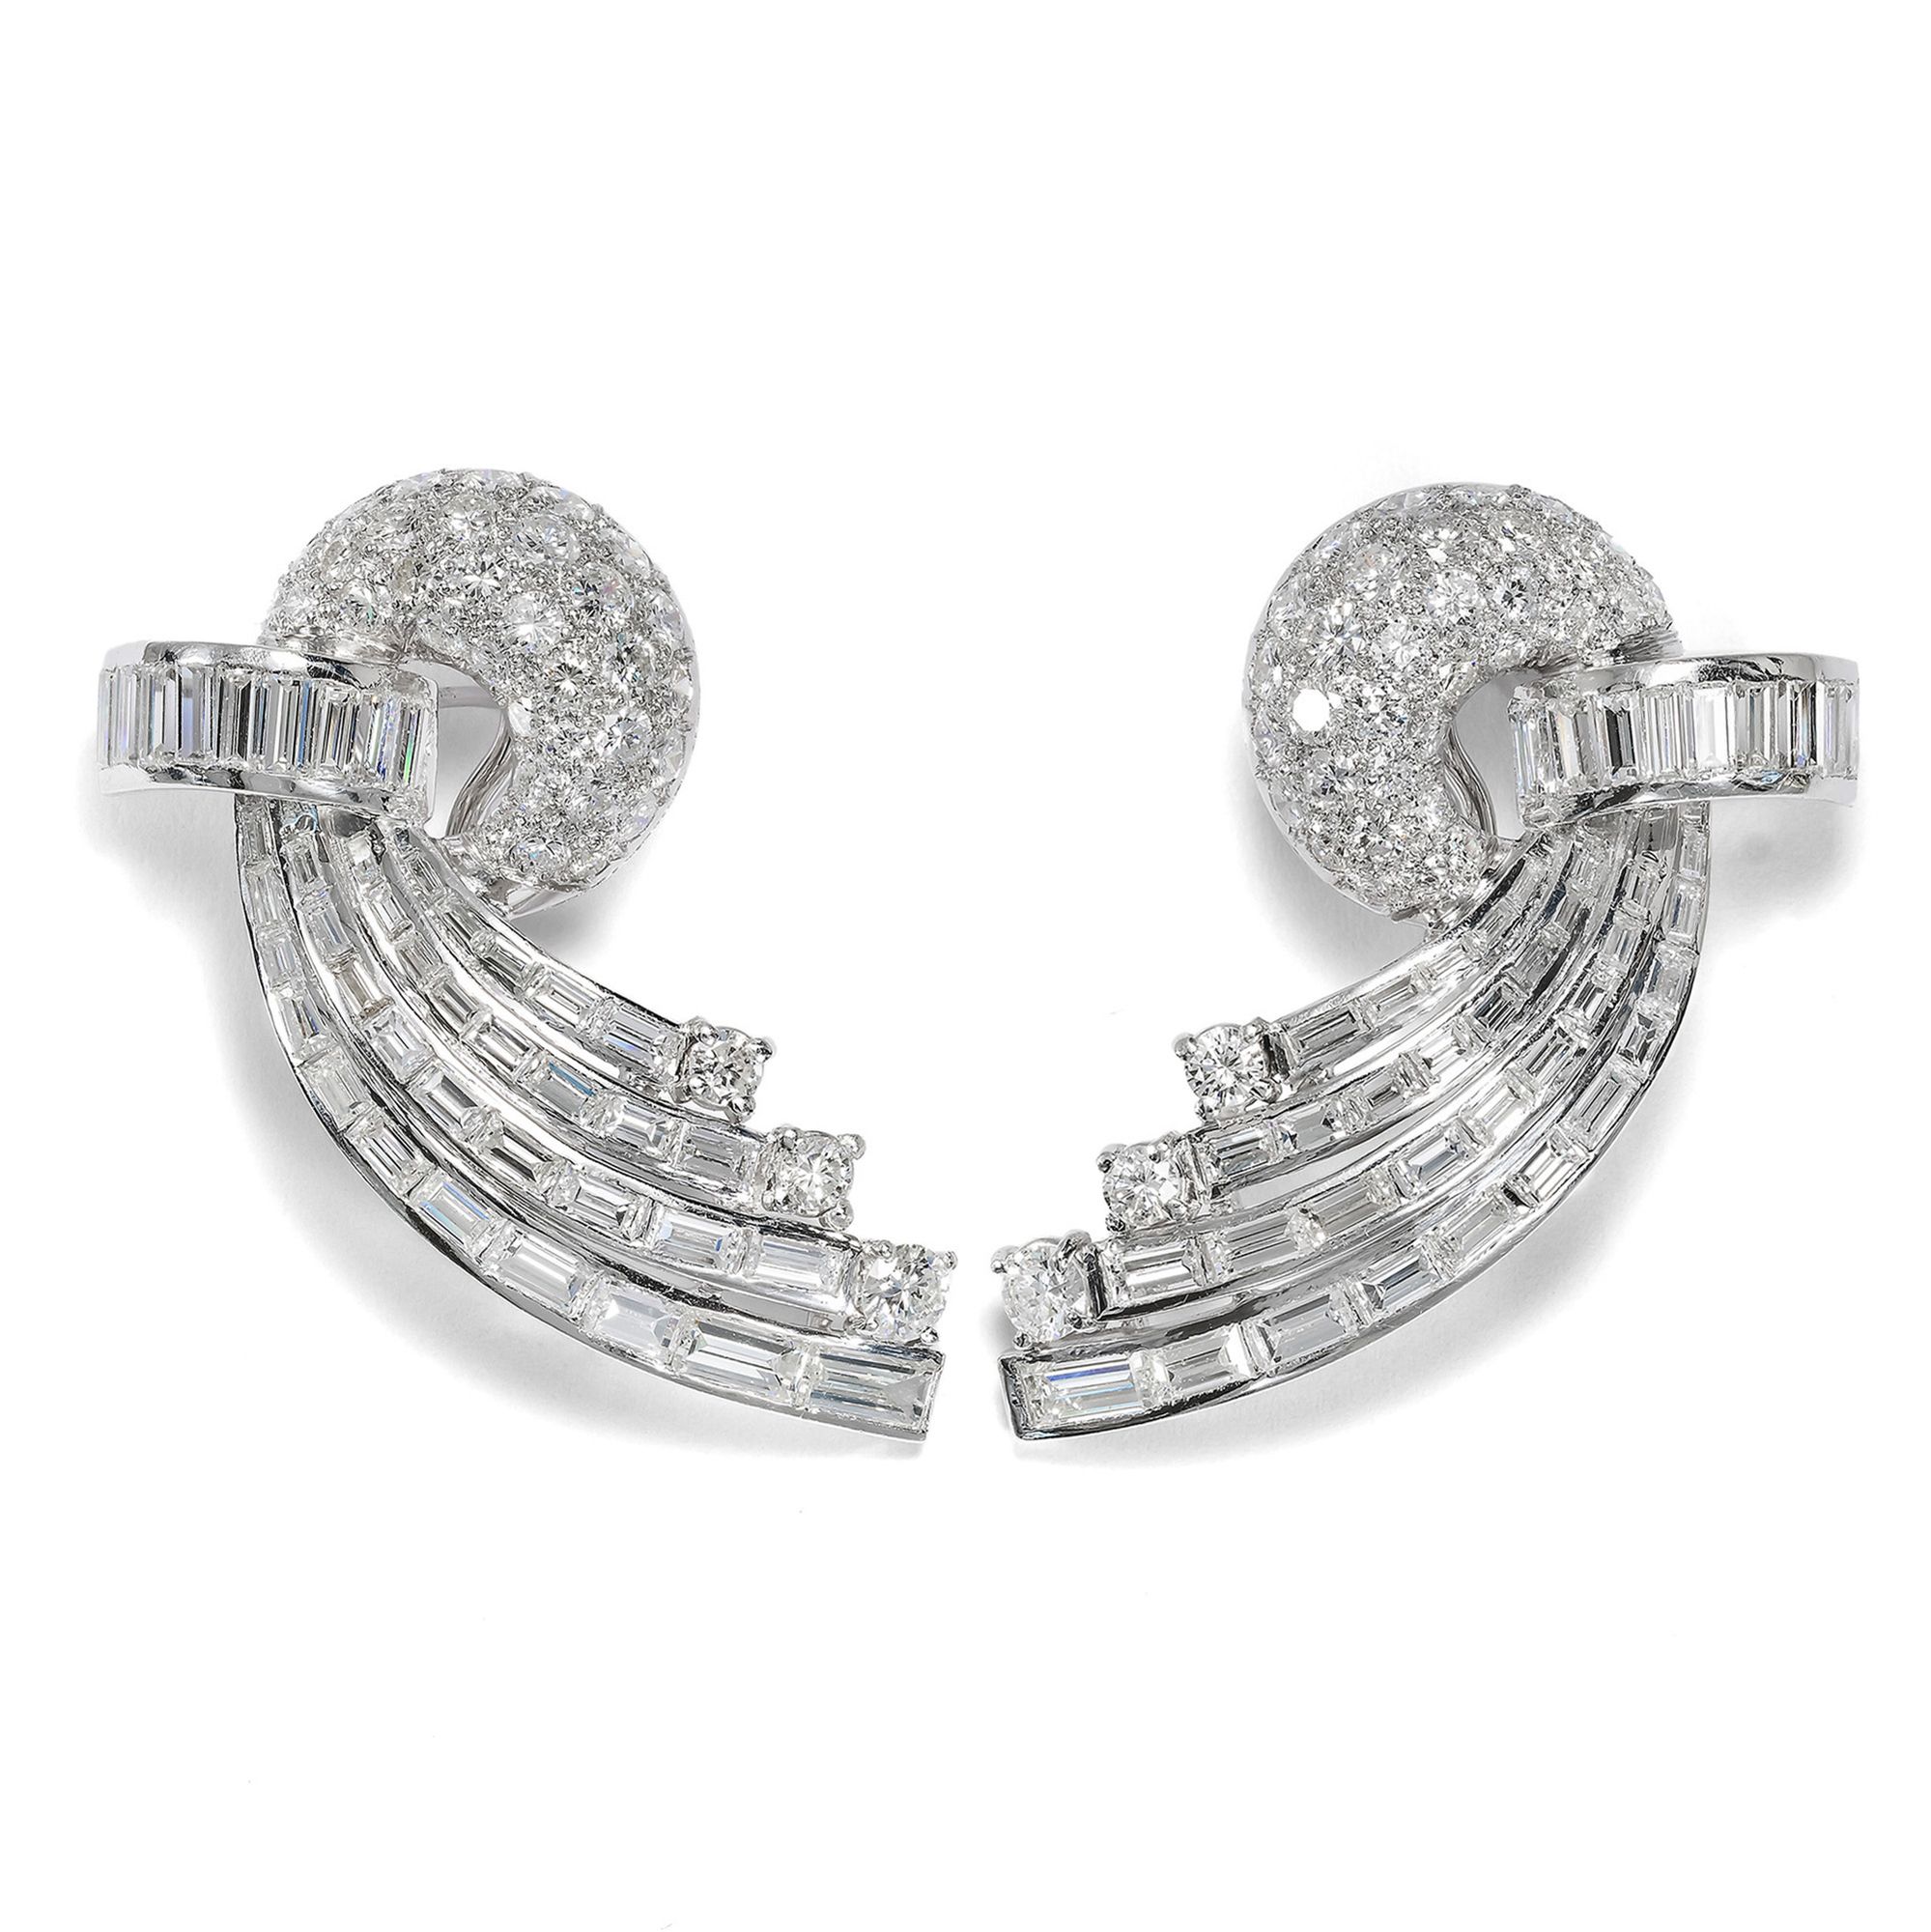 Glamorous Earrings with 13.99 ct Diamonds Set in Platinum, 1950s